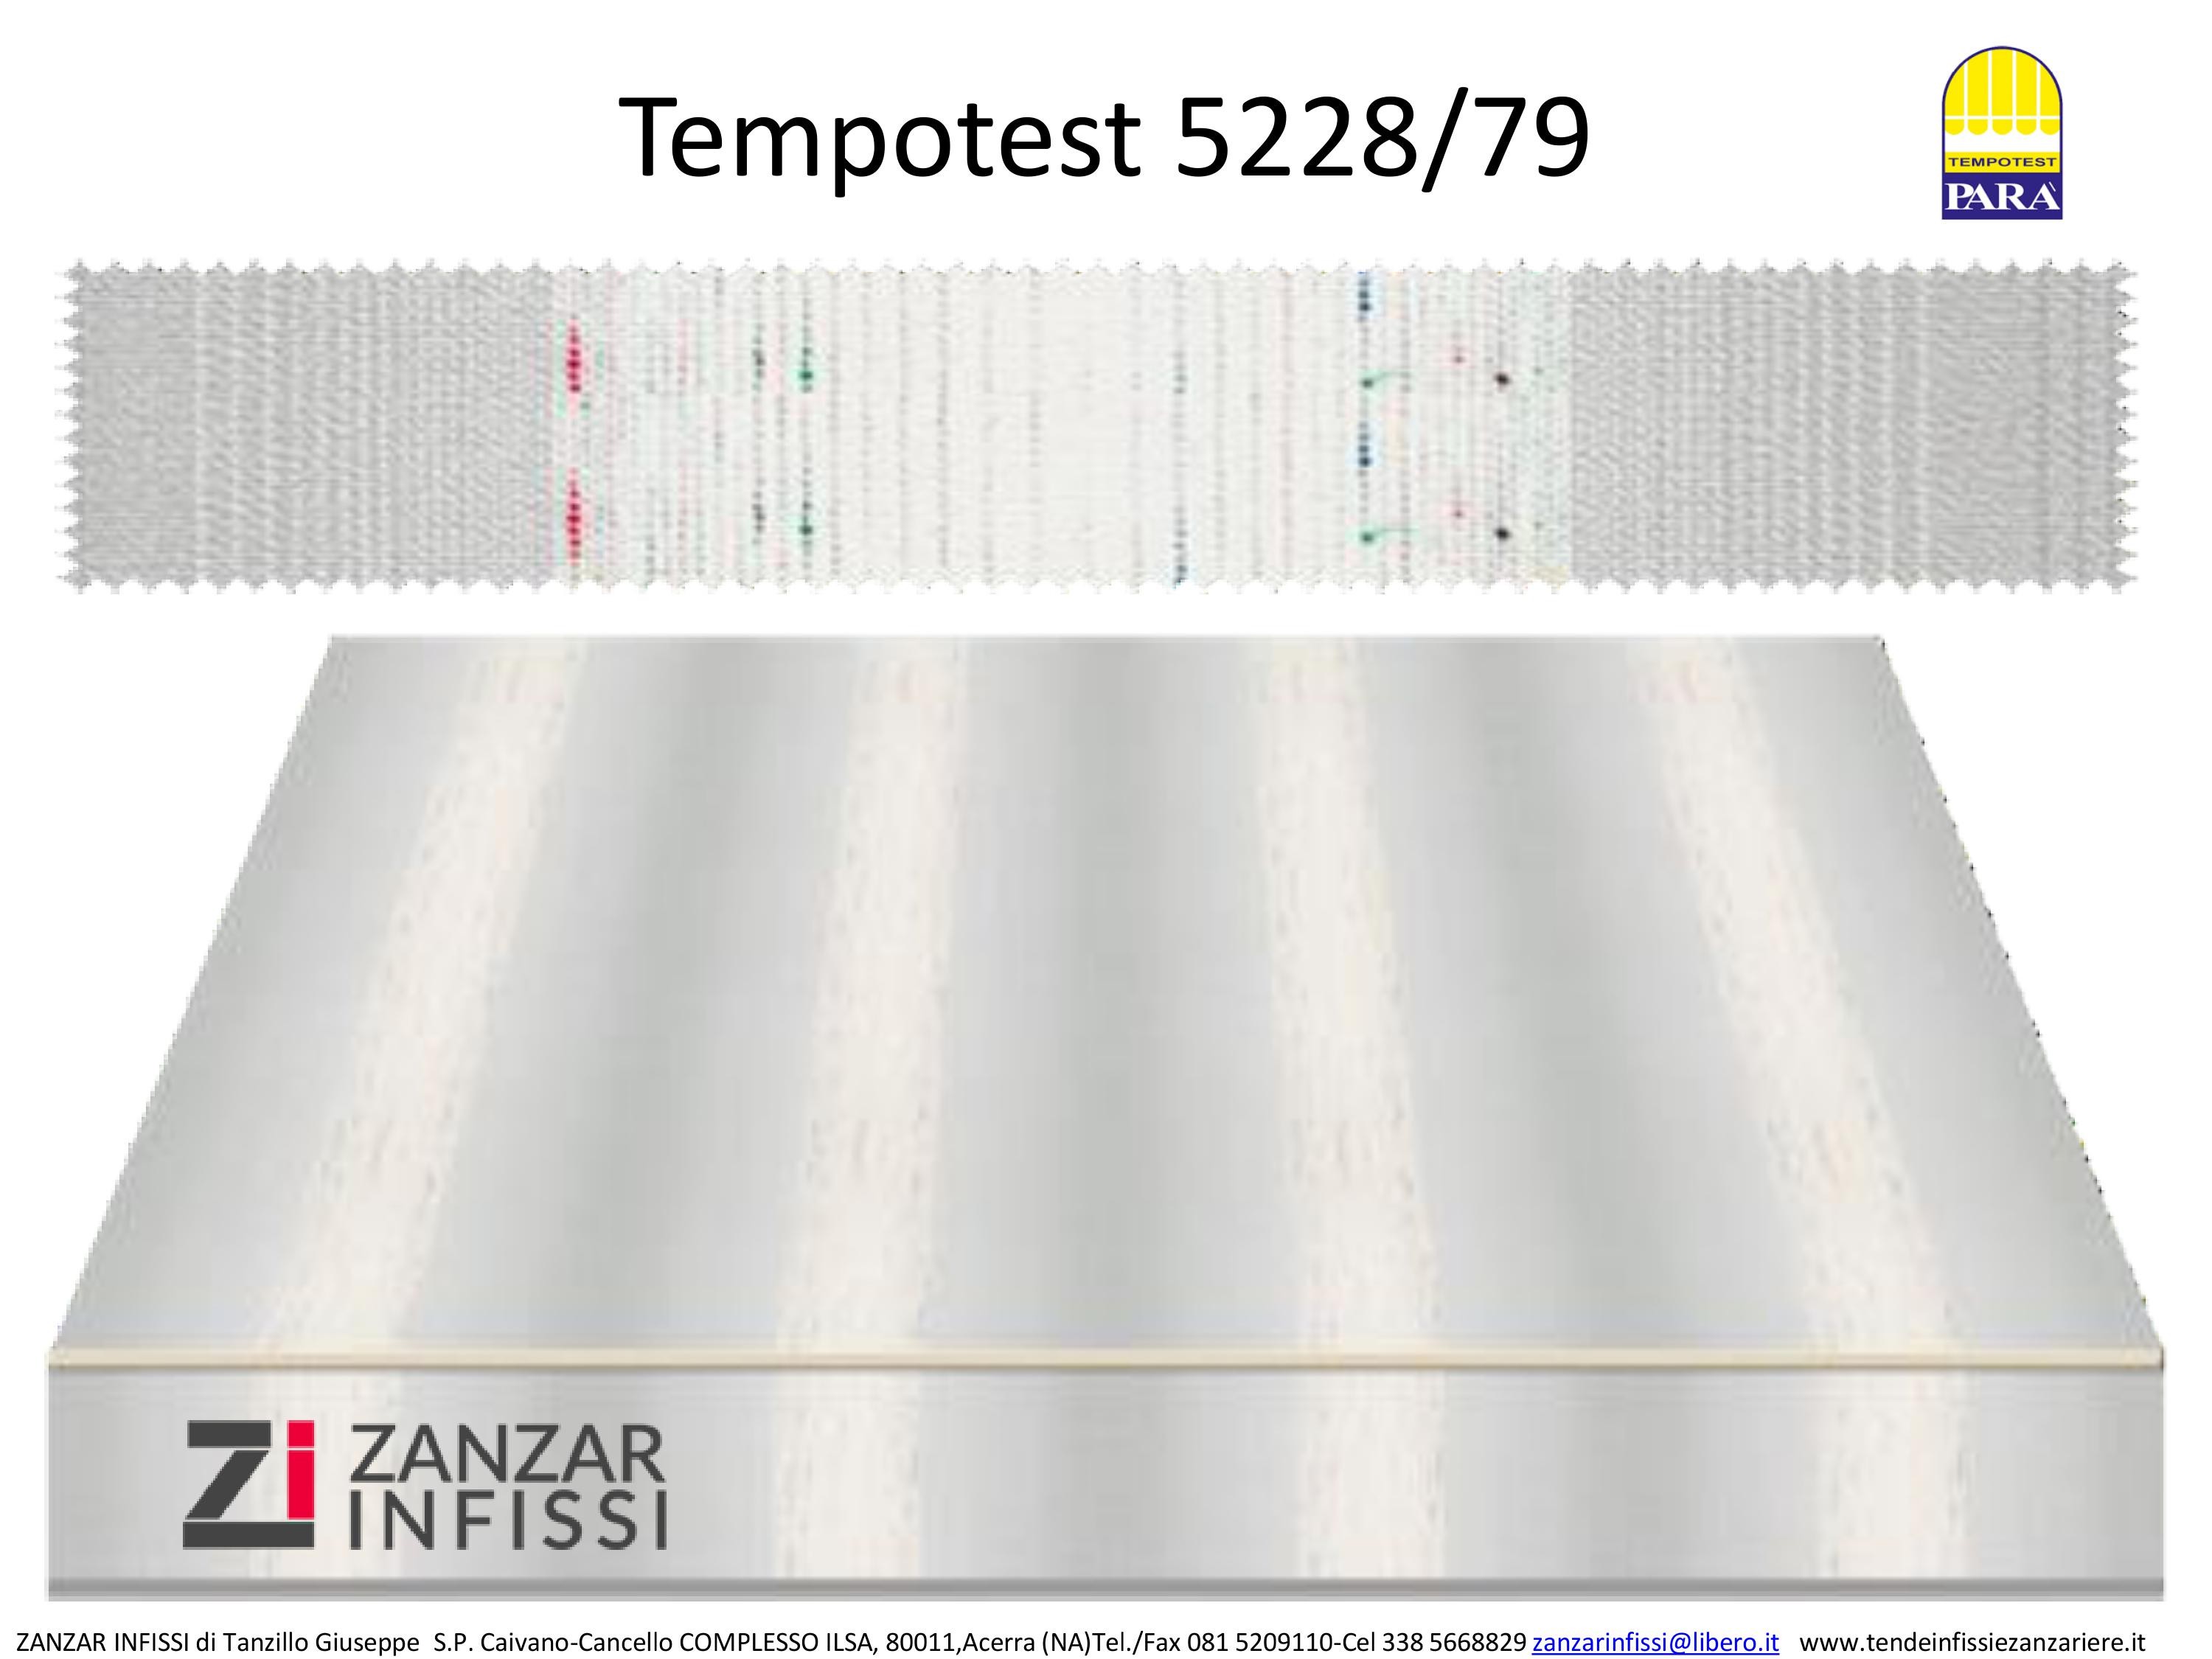 Tempotest 5228/79